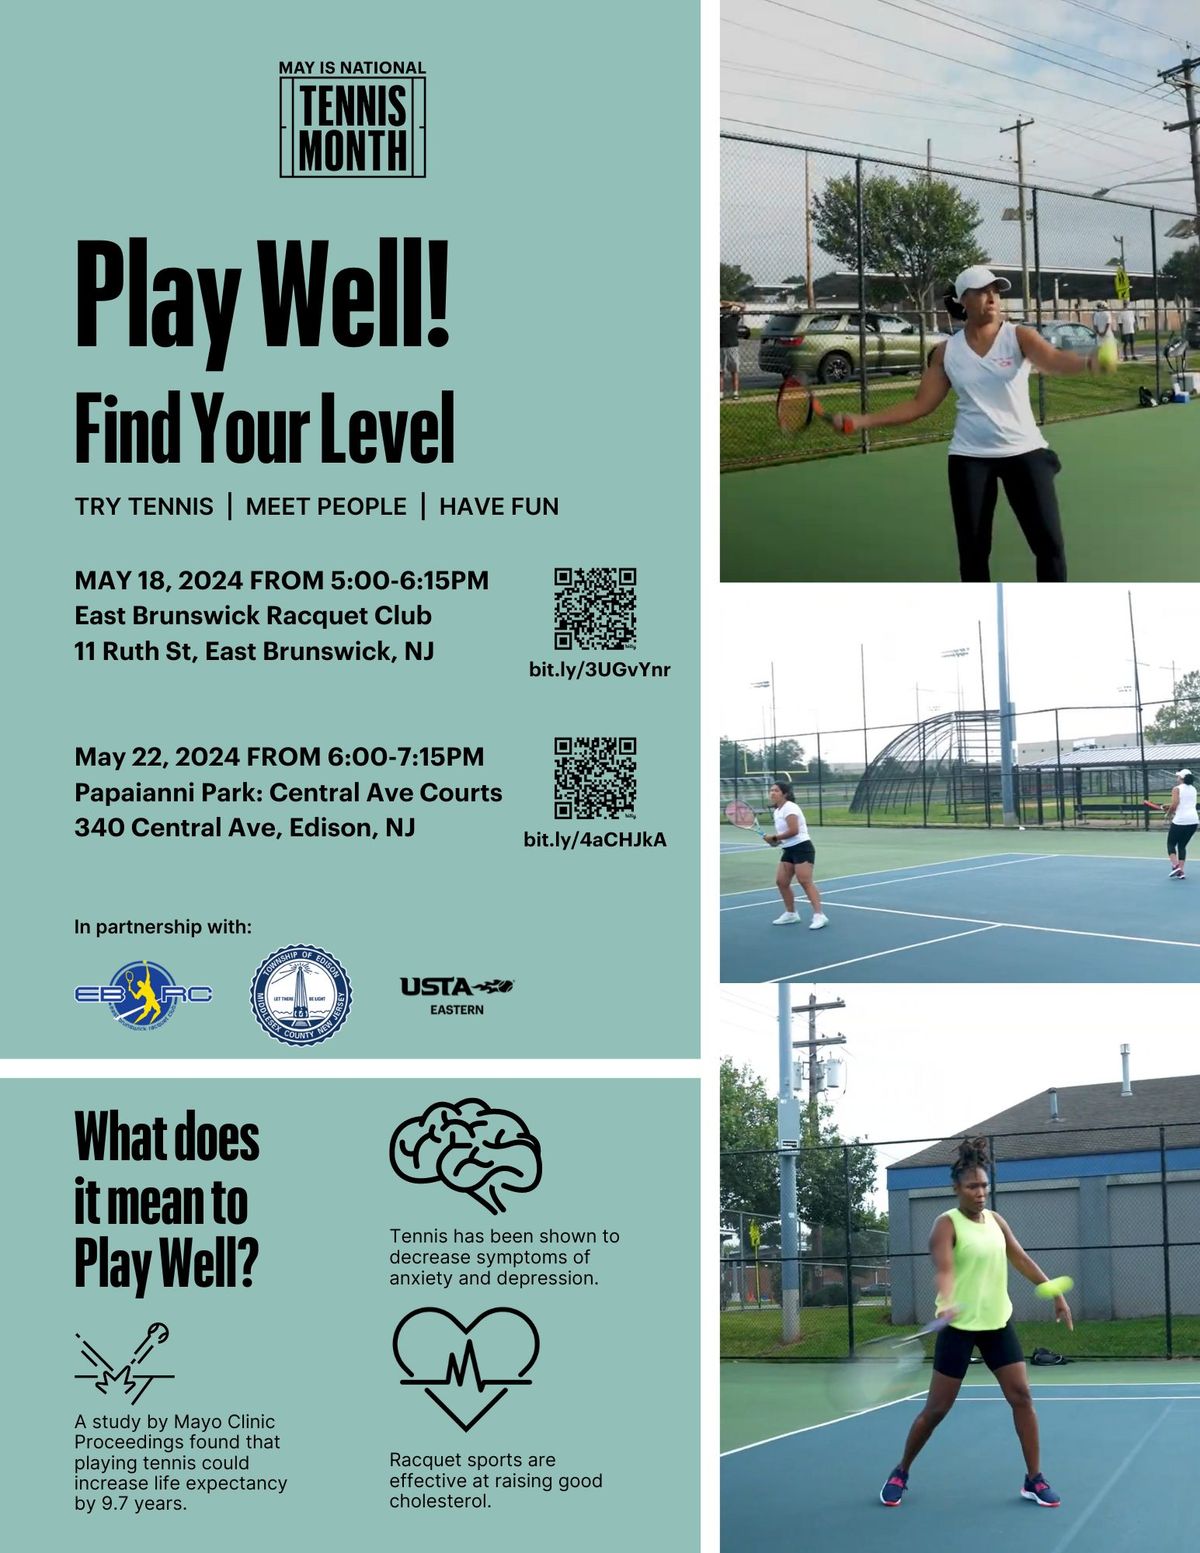 Find Your Level Tennis for New & Returning Players - Edison, NJ